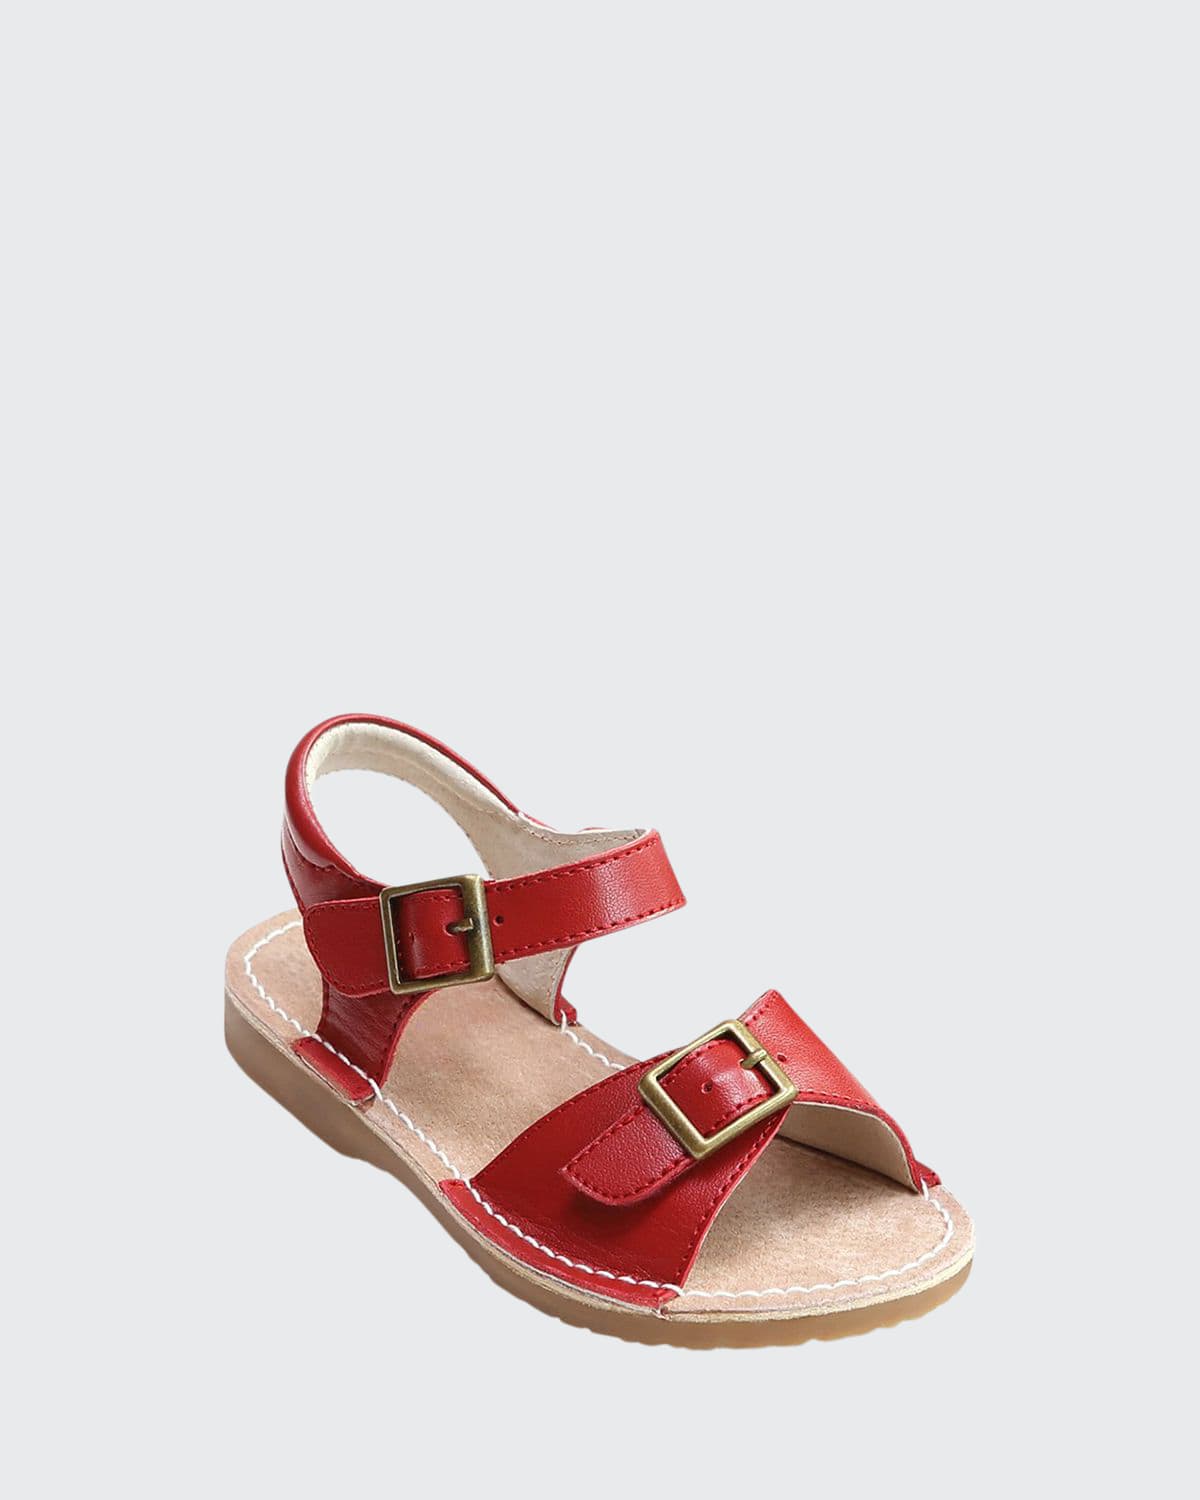 L'amour Shoes Girl's Olivia Leather Buckle Open-toe Sandal, Toddler/kids